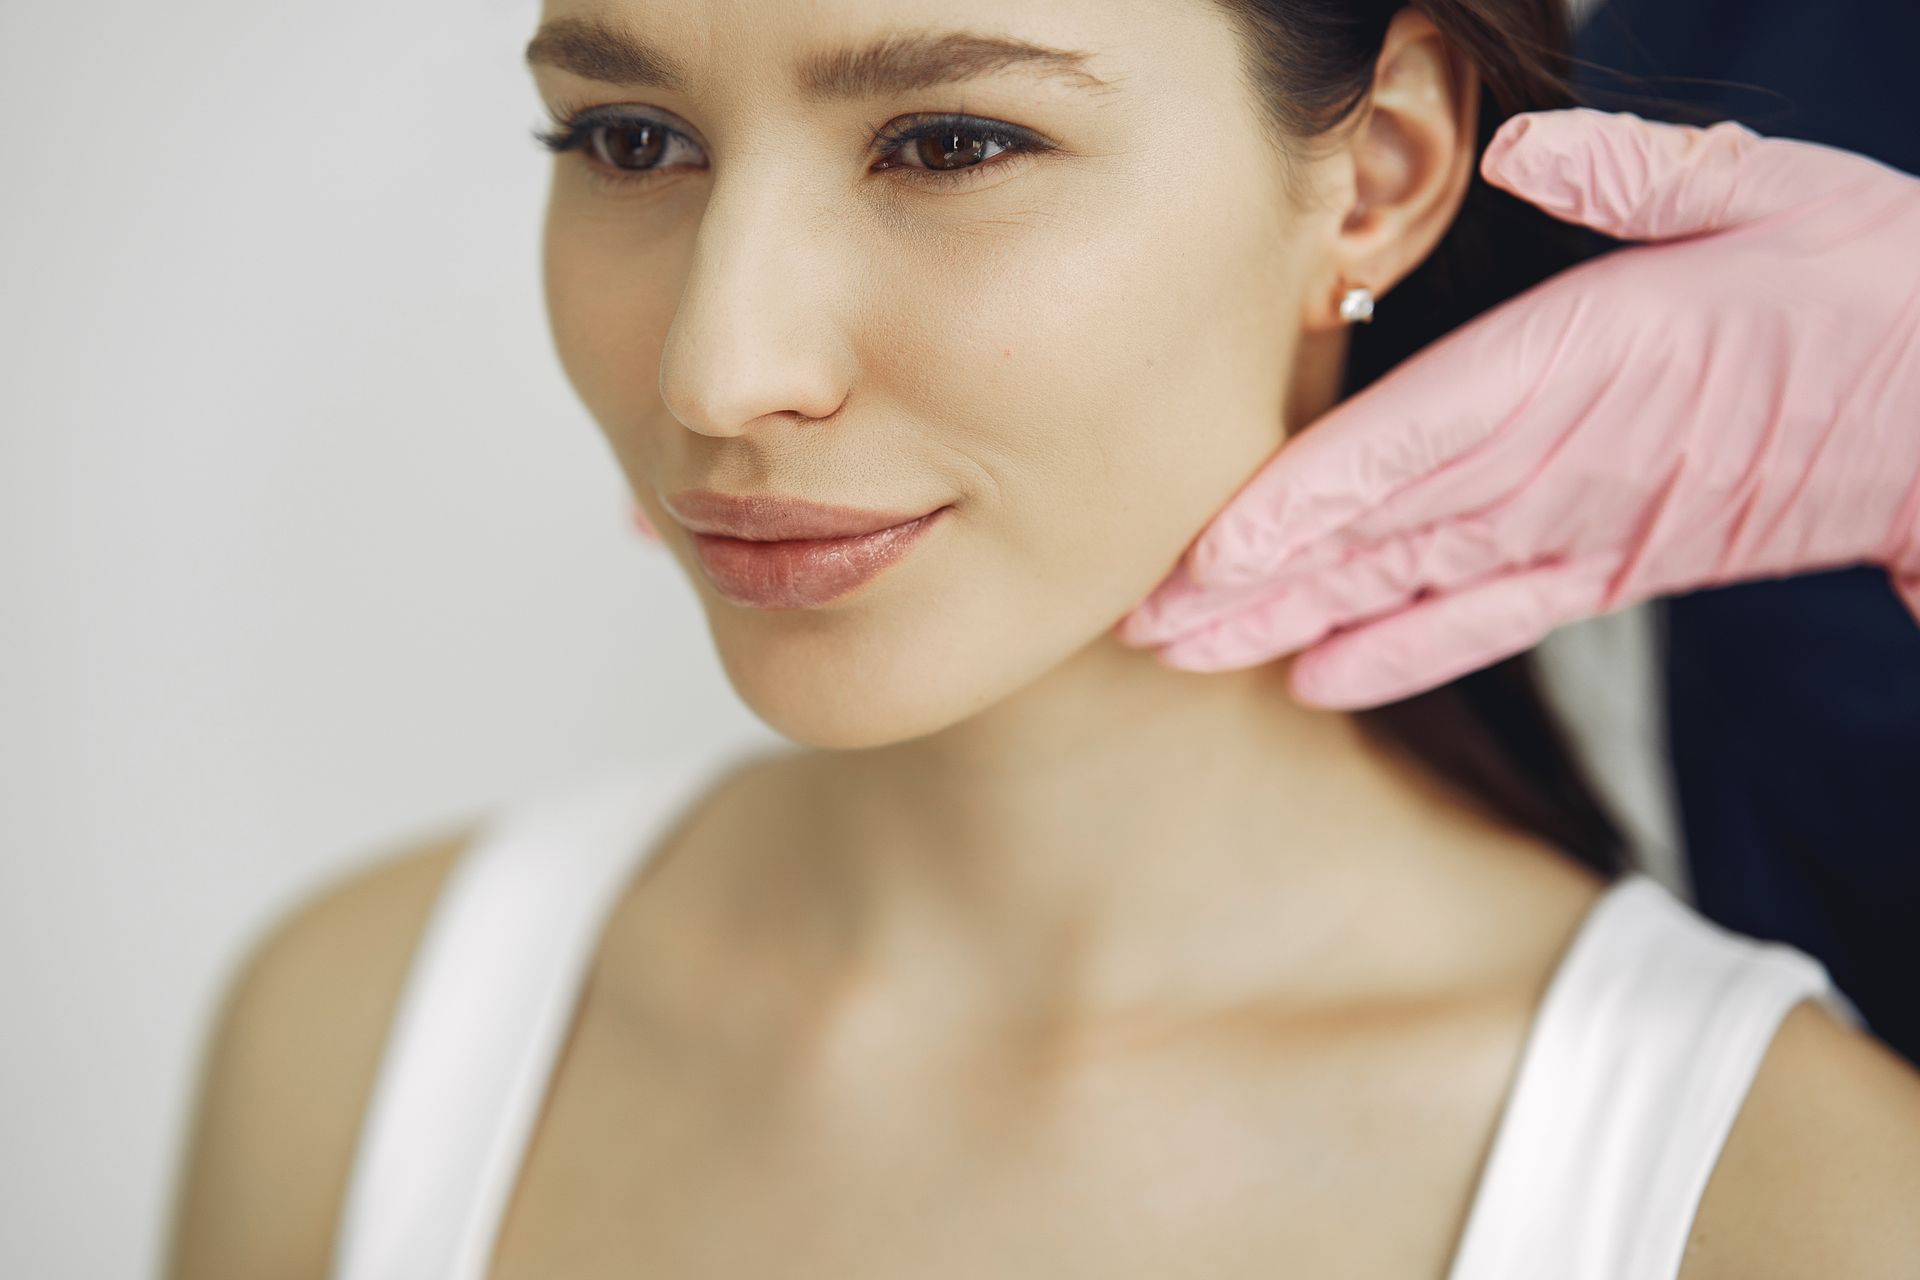 a woman with earrings is being examined by a doctor wearing pink gloves